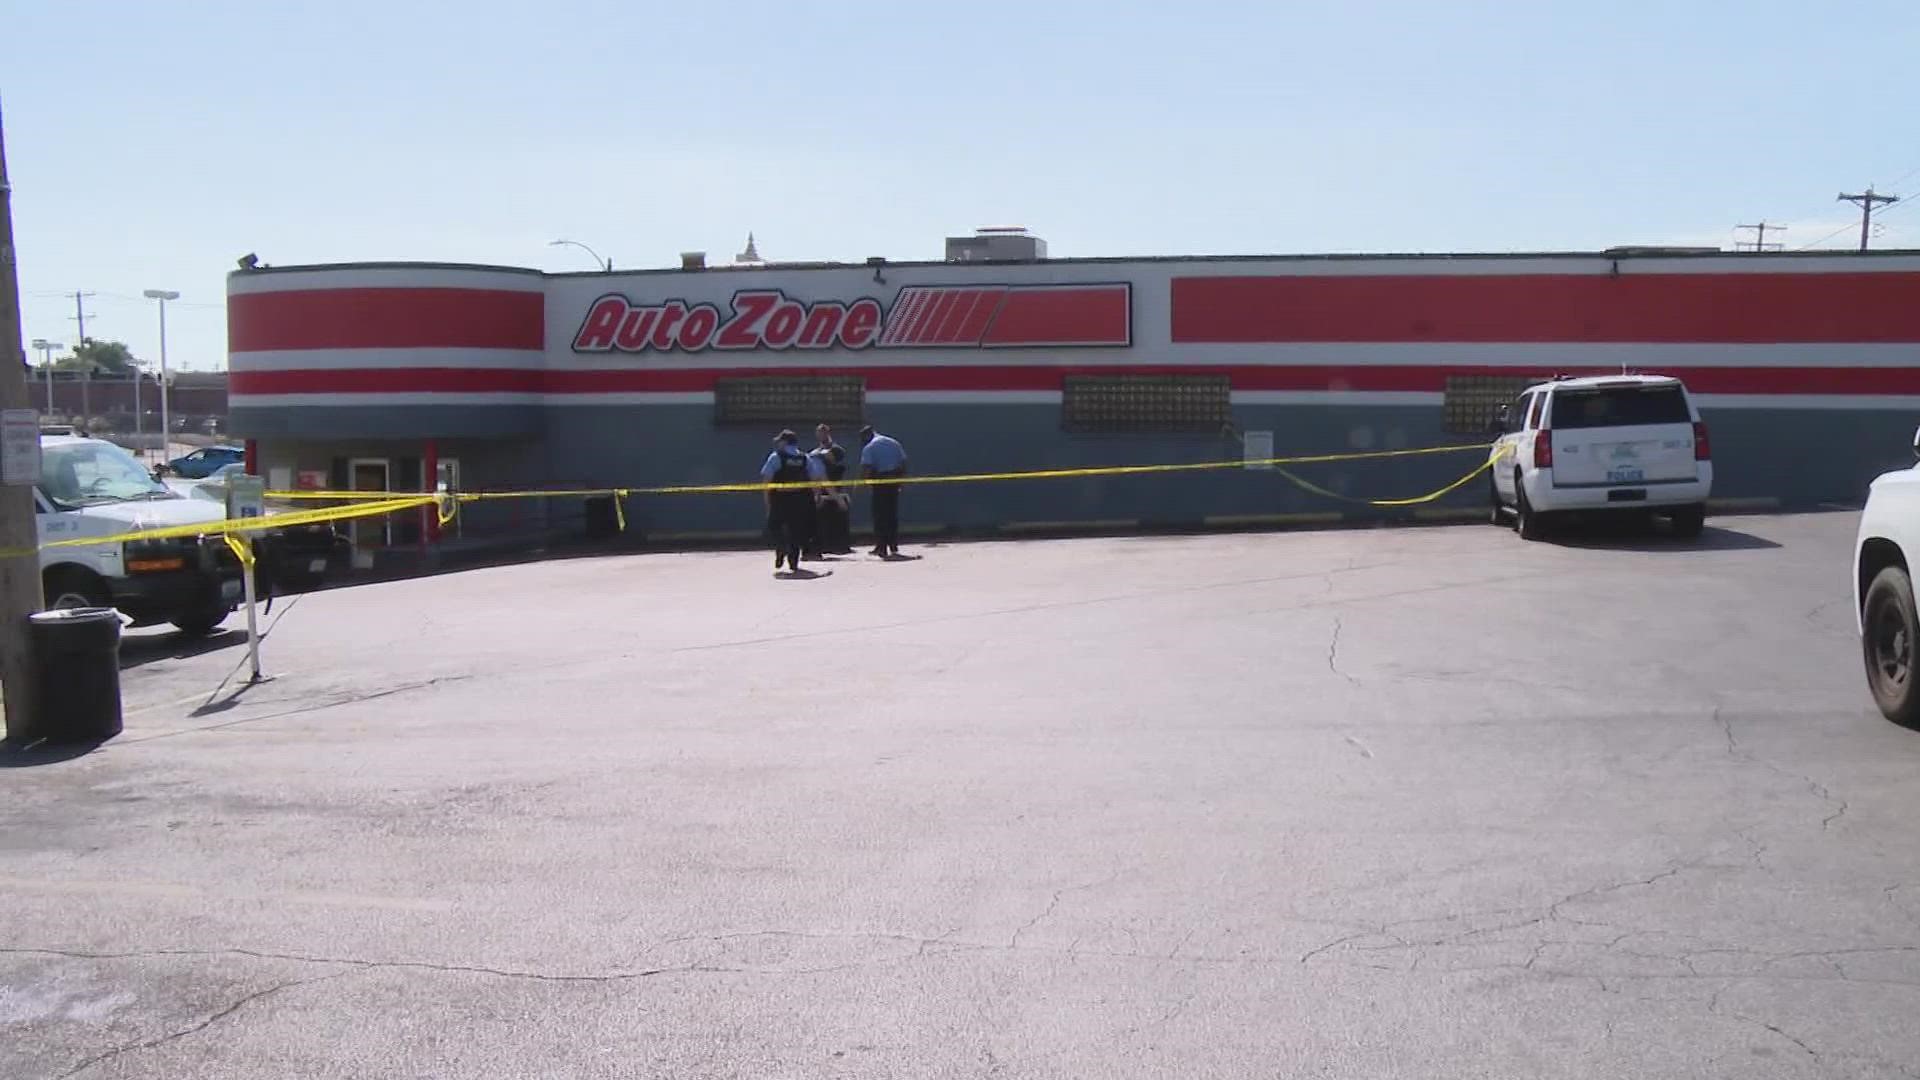 The boy shot himself just before noon in the parking lot of the AutoZone located at 3619 South Kingshighway Boulevard, according to the St. Louis police.